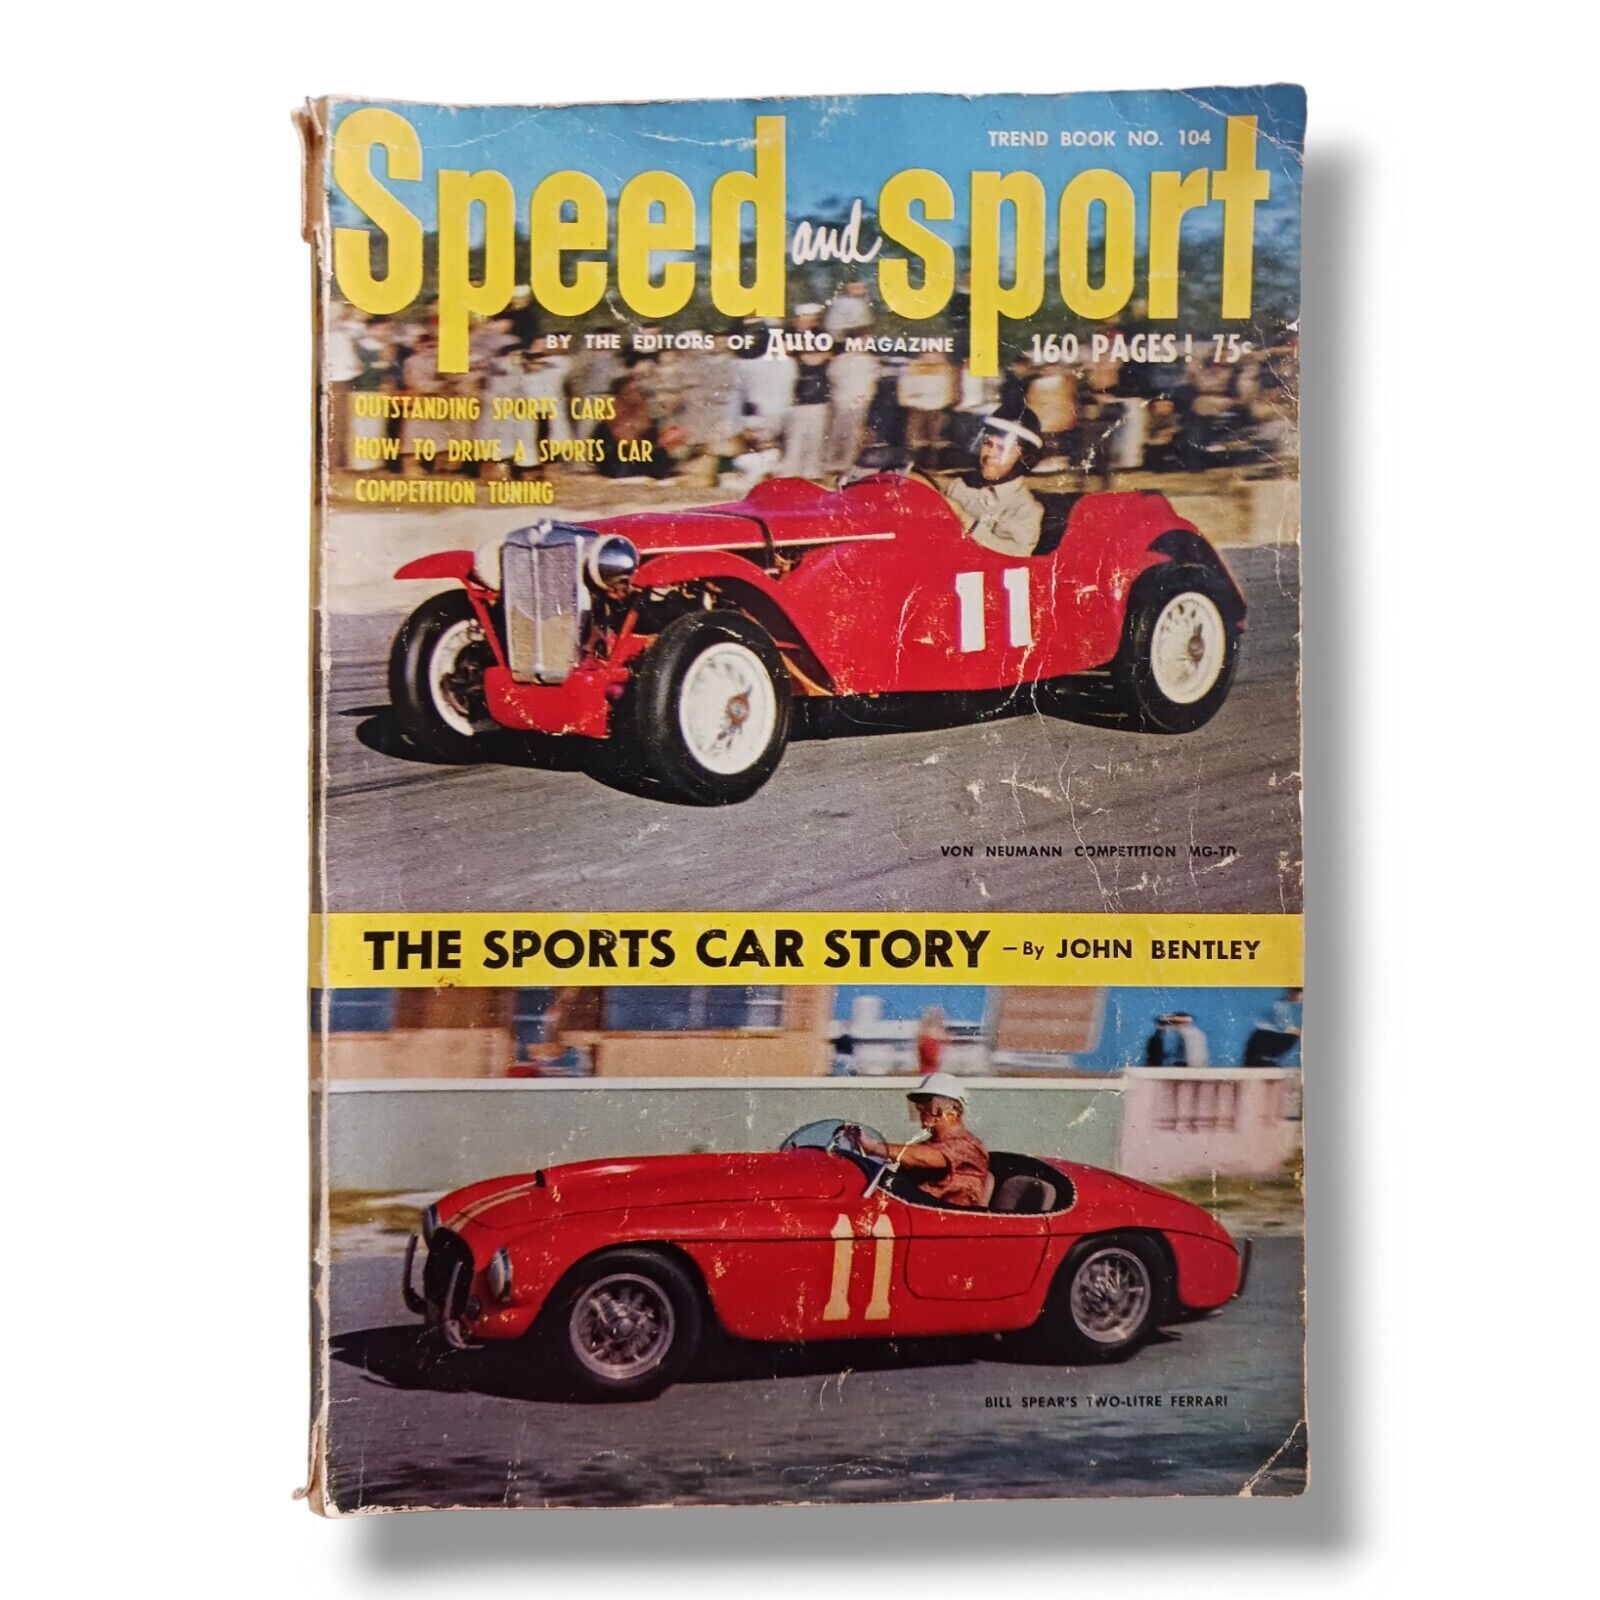 SPEED AND SPORT Magazine, TREND BOOK #104, SPORTS CAR STORY BY JOHN BENTLEY